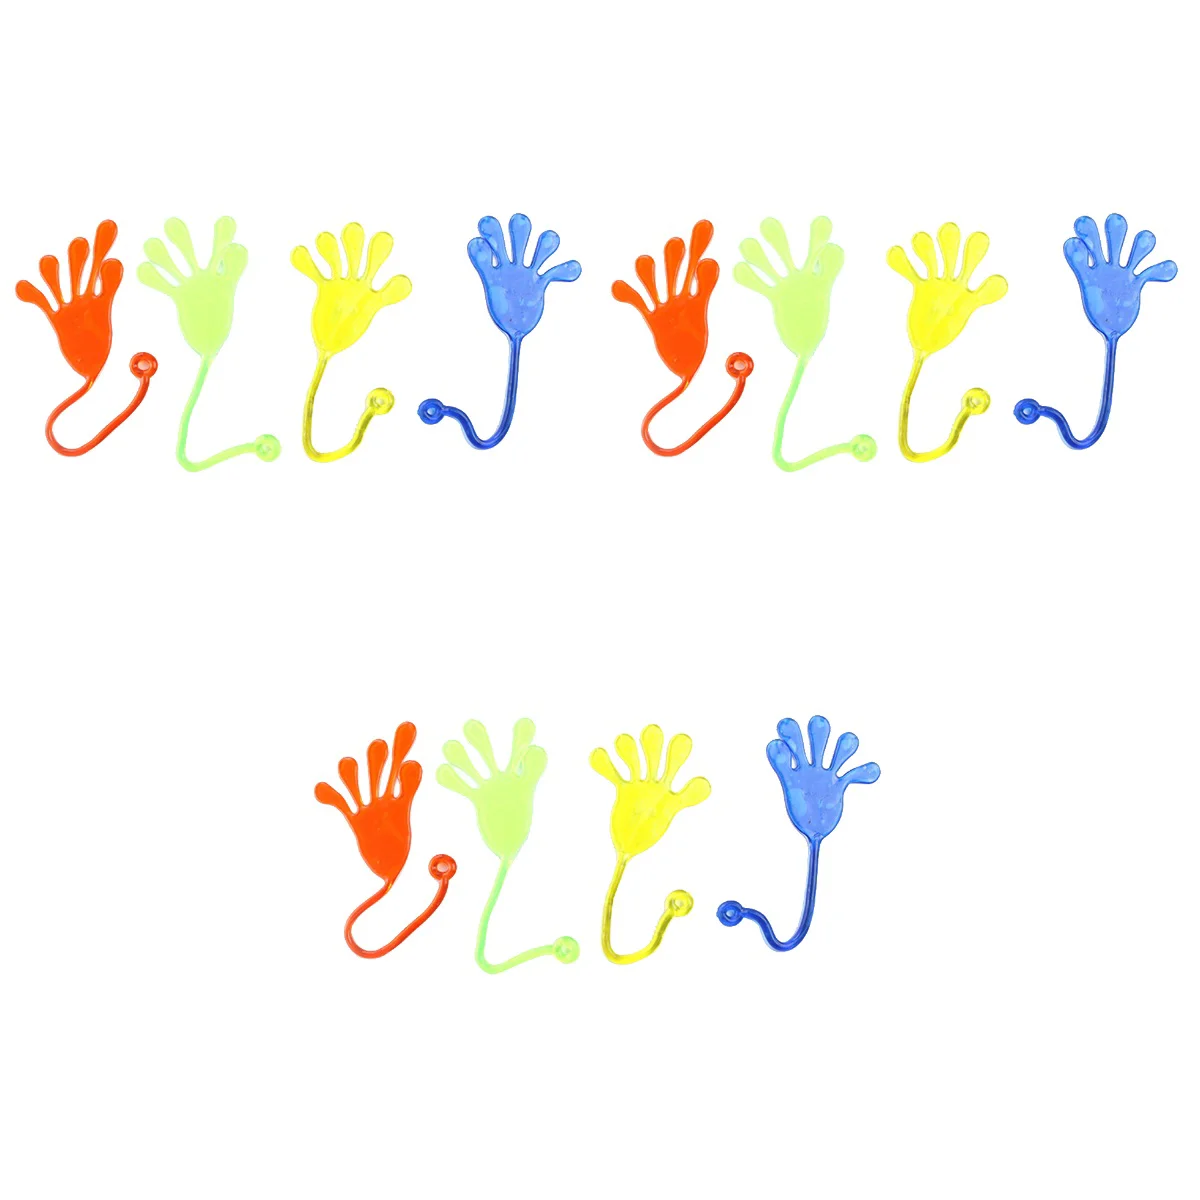 

54 pcs Sticky Hands Wacky Funny Stretchy Sticky Hands for Children Birthday Christmas Party Favors (Random Color)